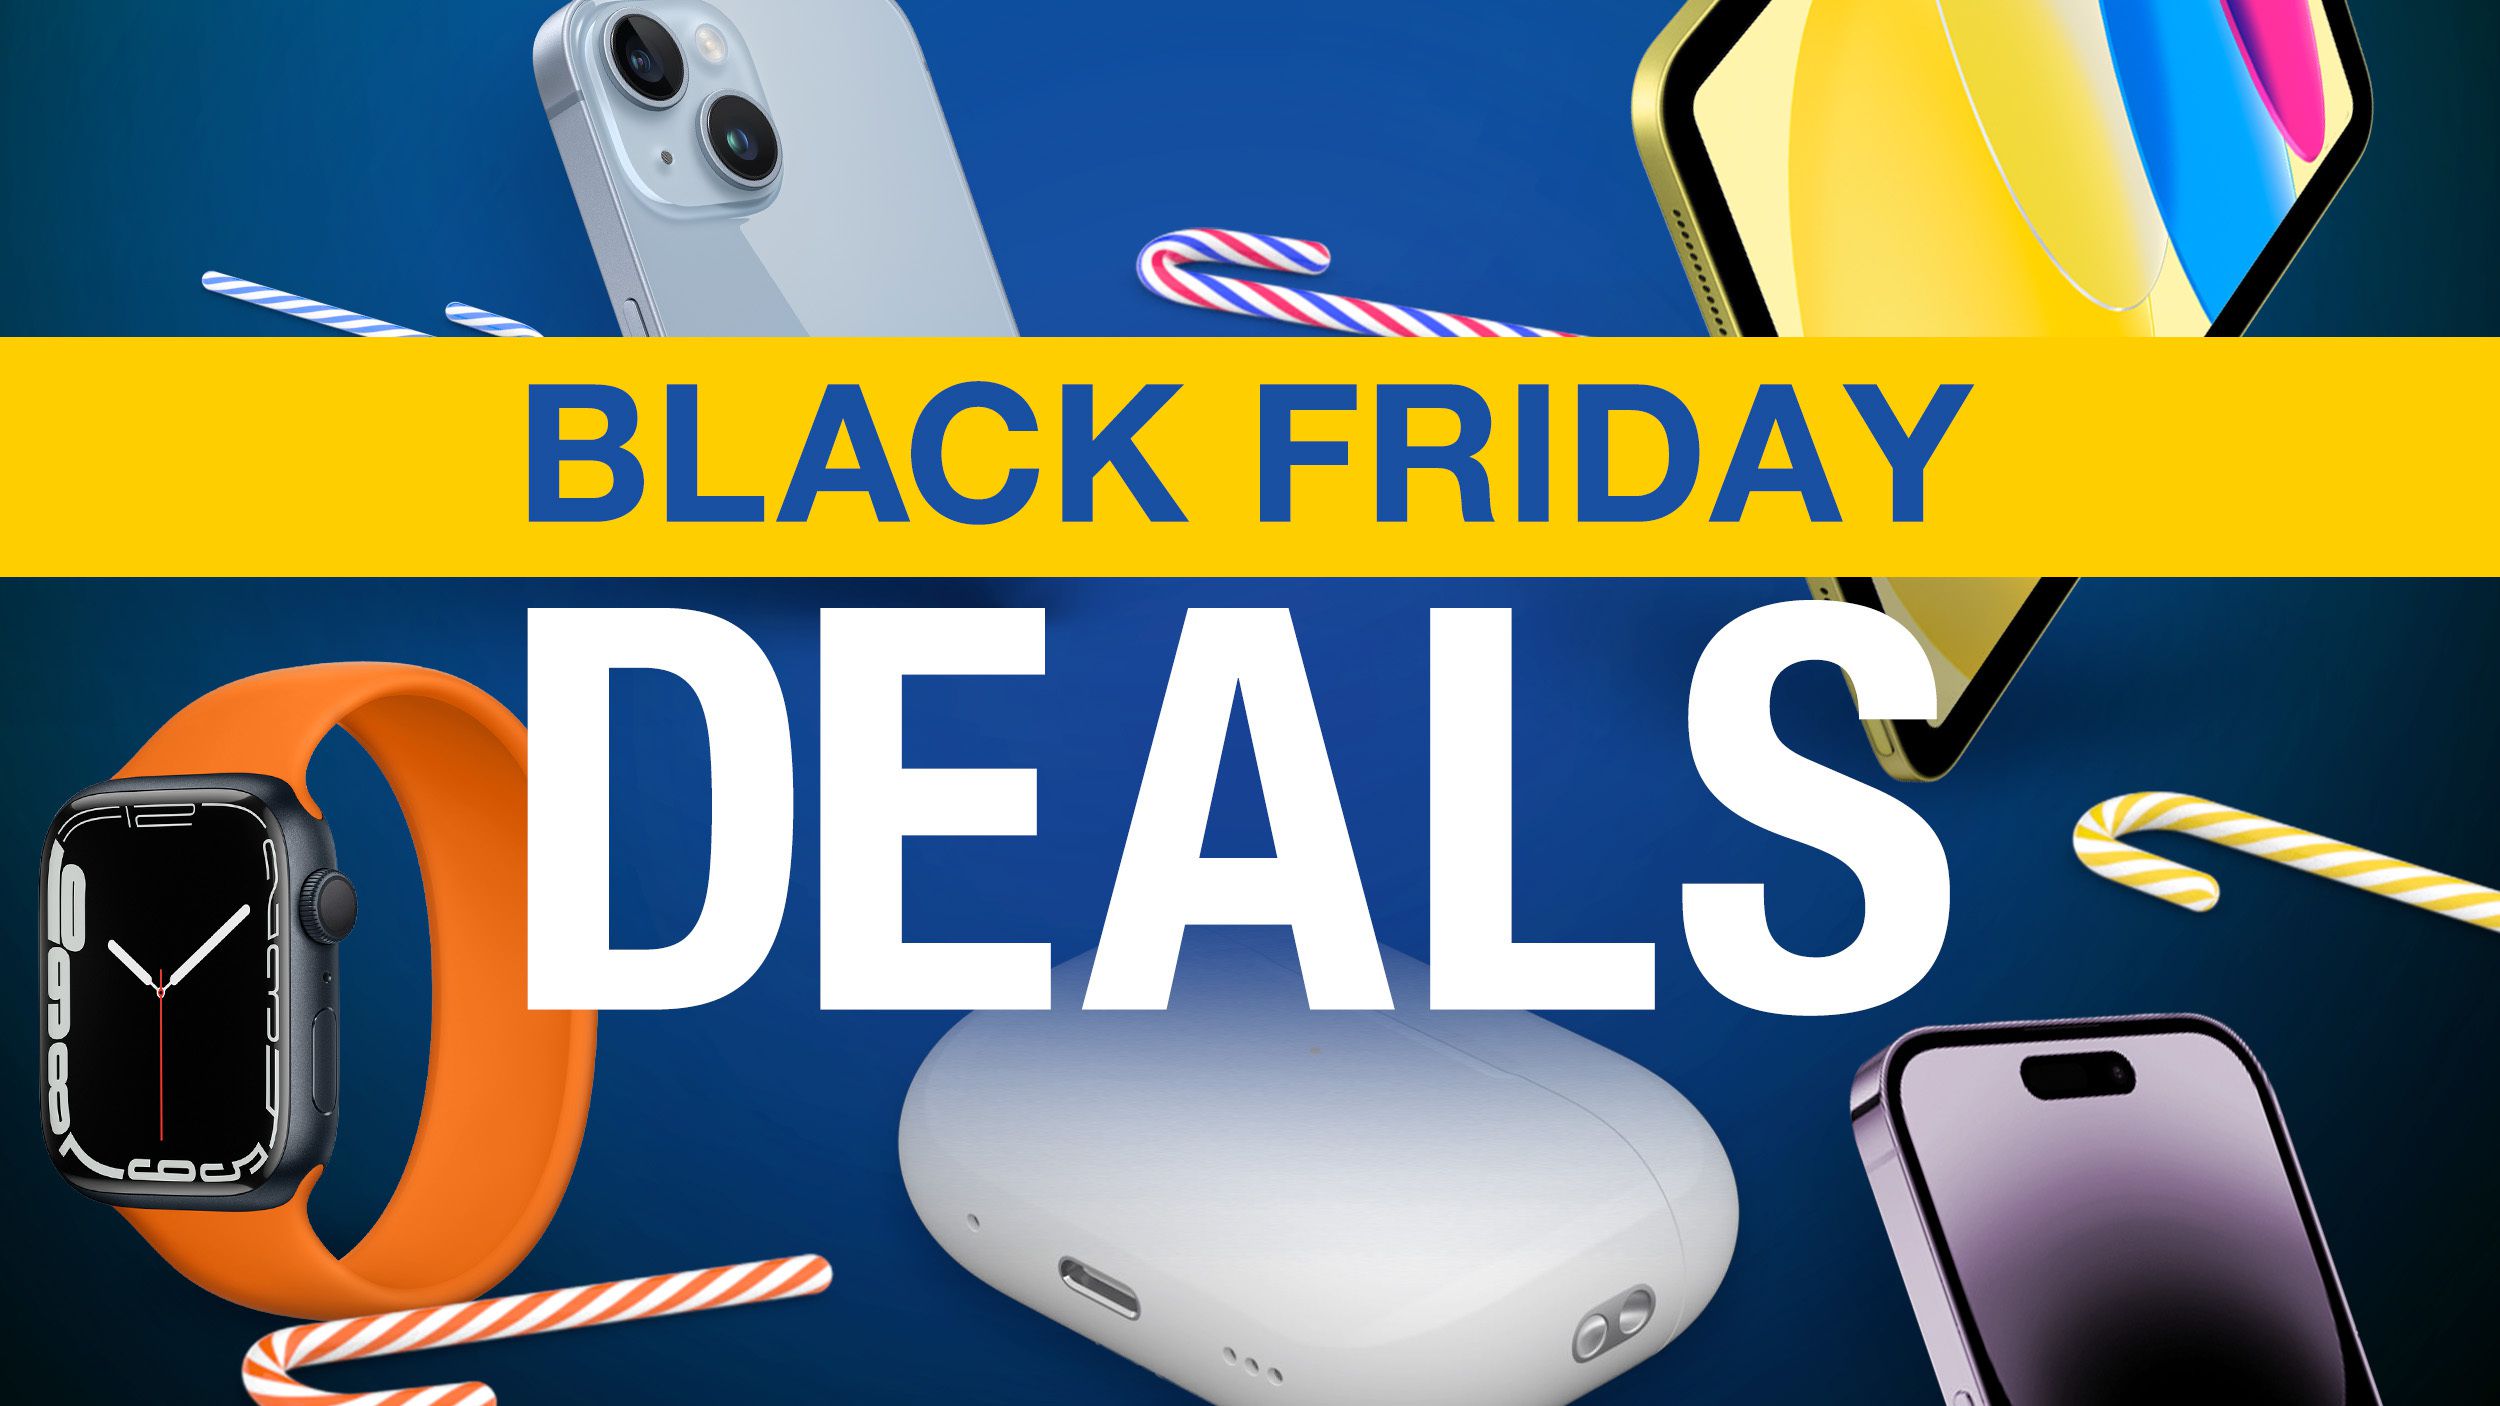 Apple Black Friday Deals Available Already: AirPods, iPhone, iPad, and More thumbnail